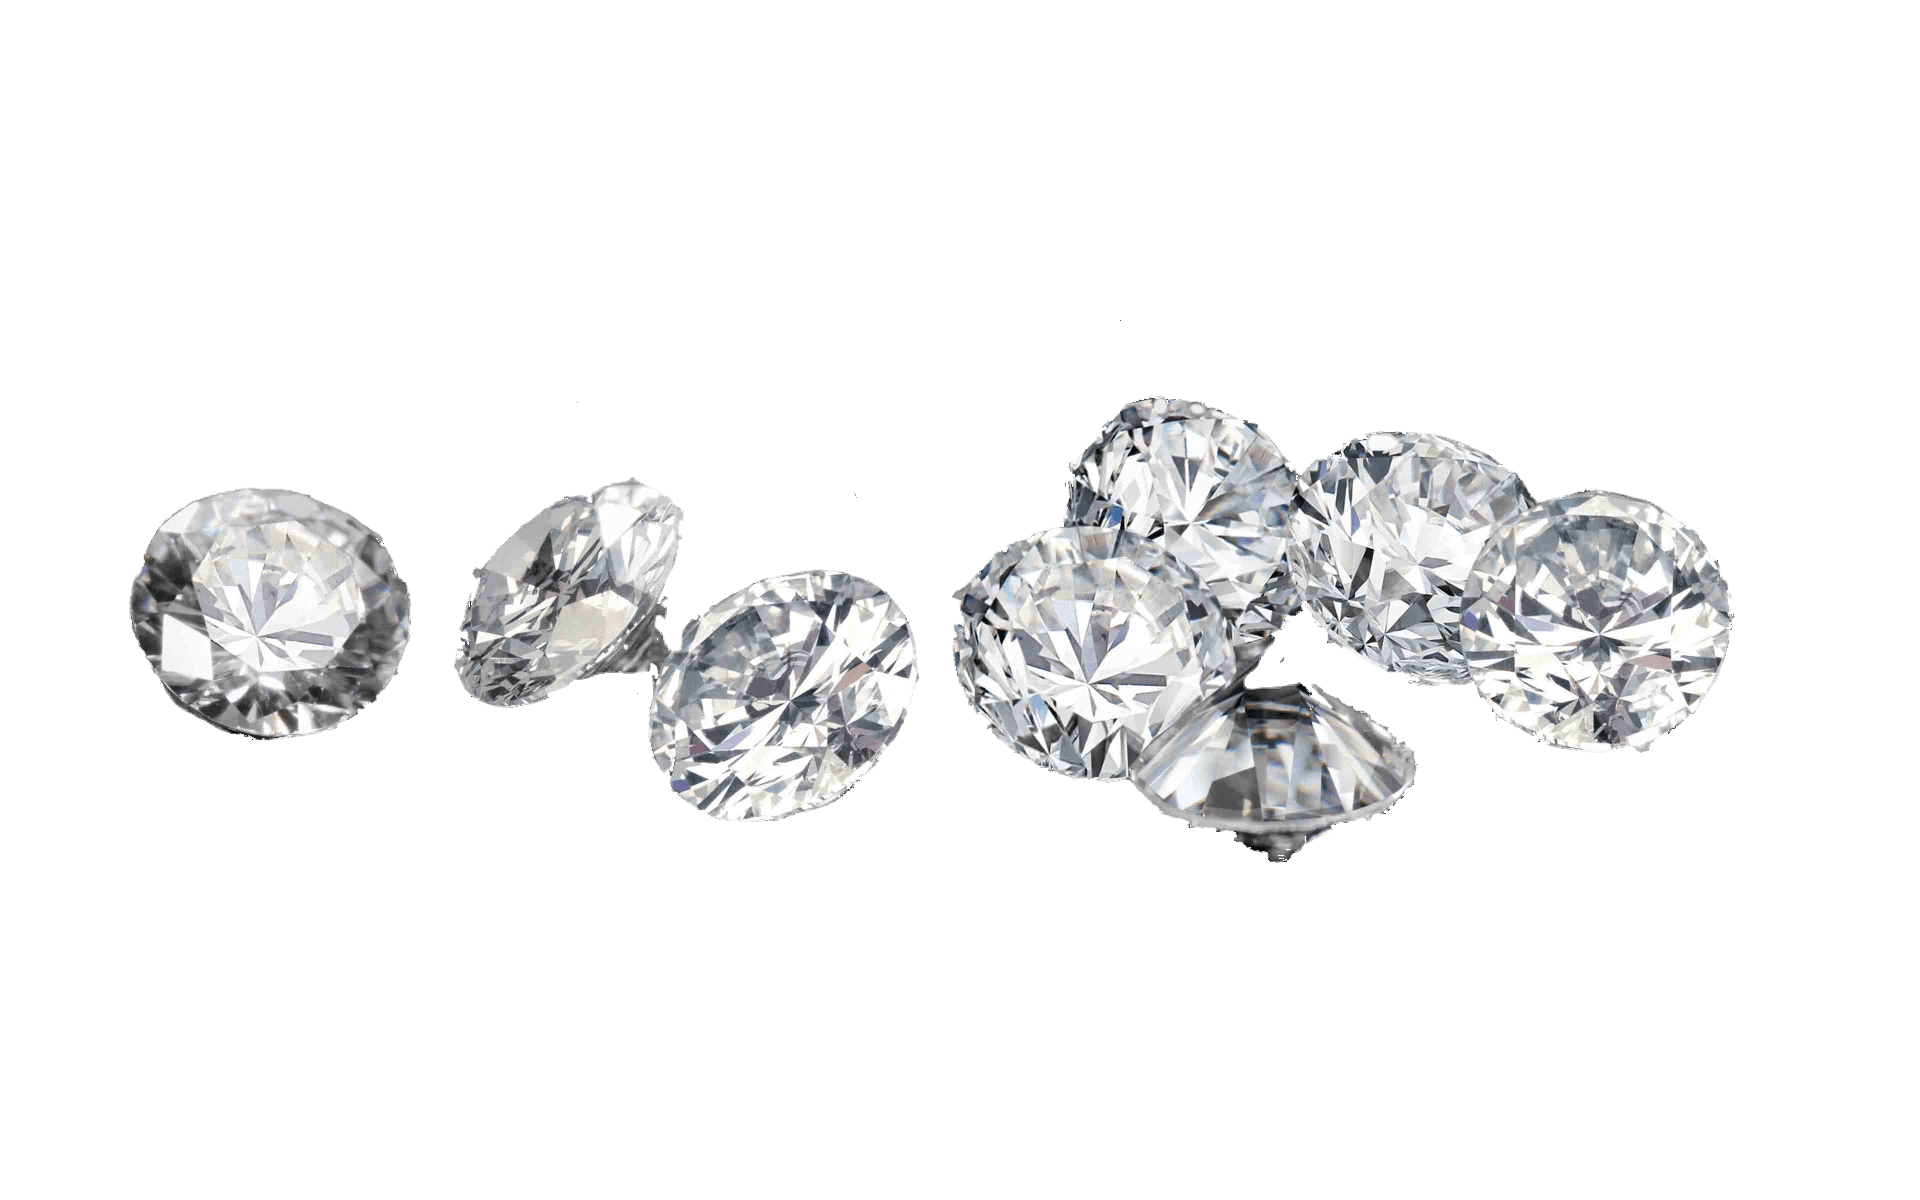 Engagement Ring Diamond Jewellery Diamonds PNG Image High Quality Clipart